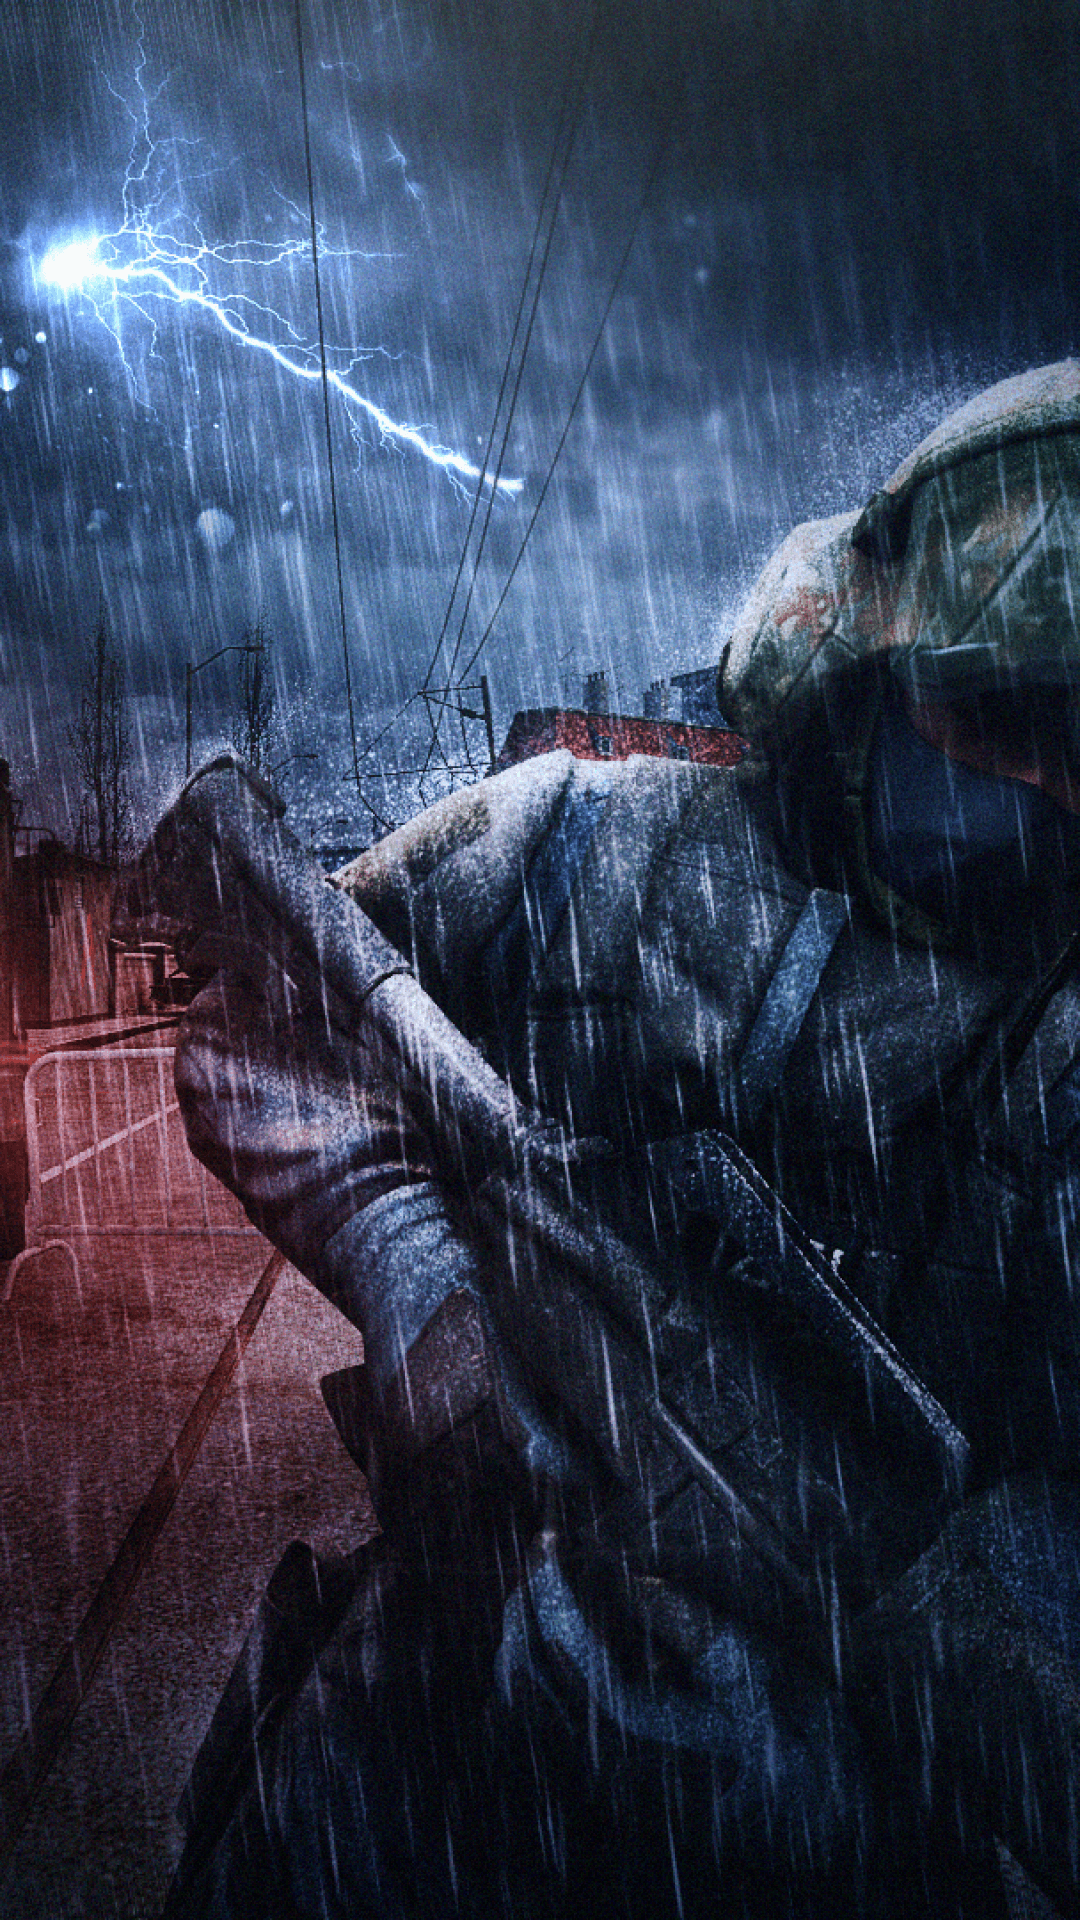 Counter Strike Global Offensive Wallpapers